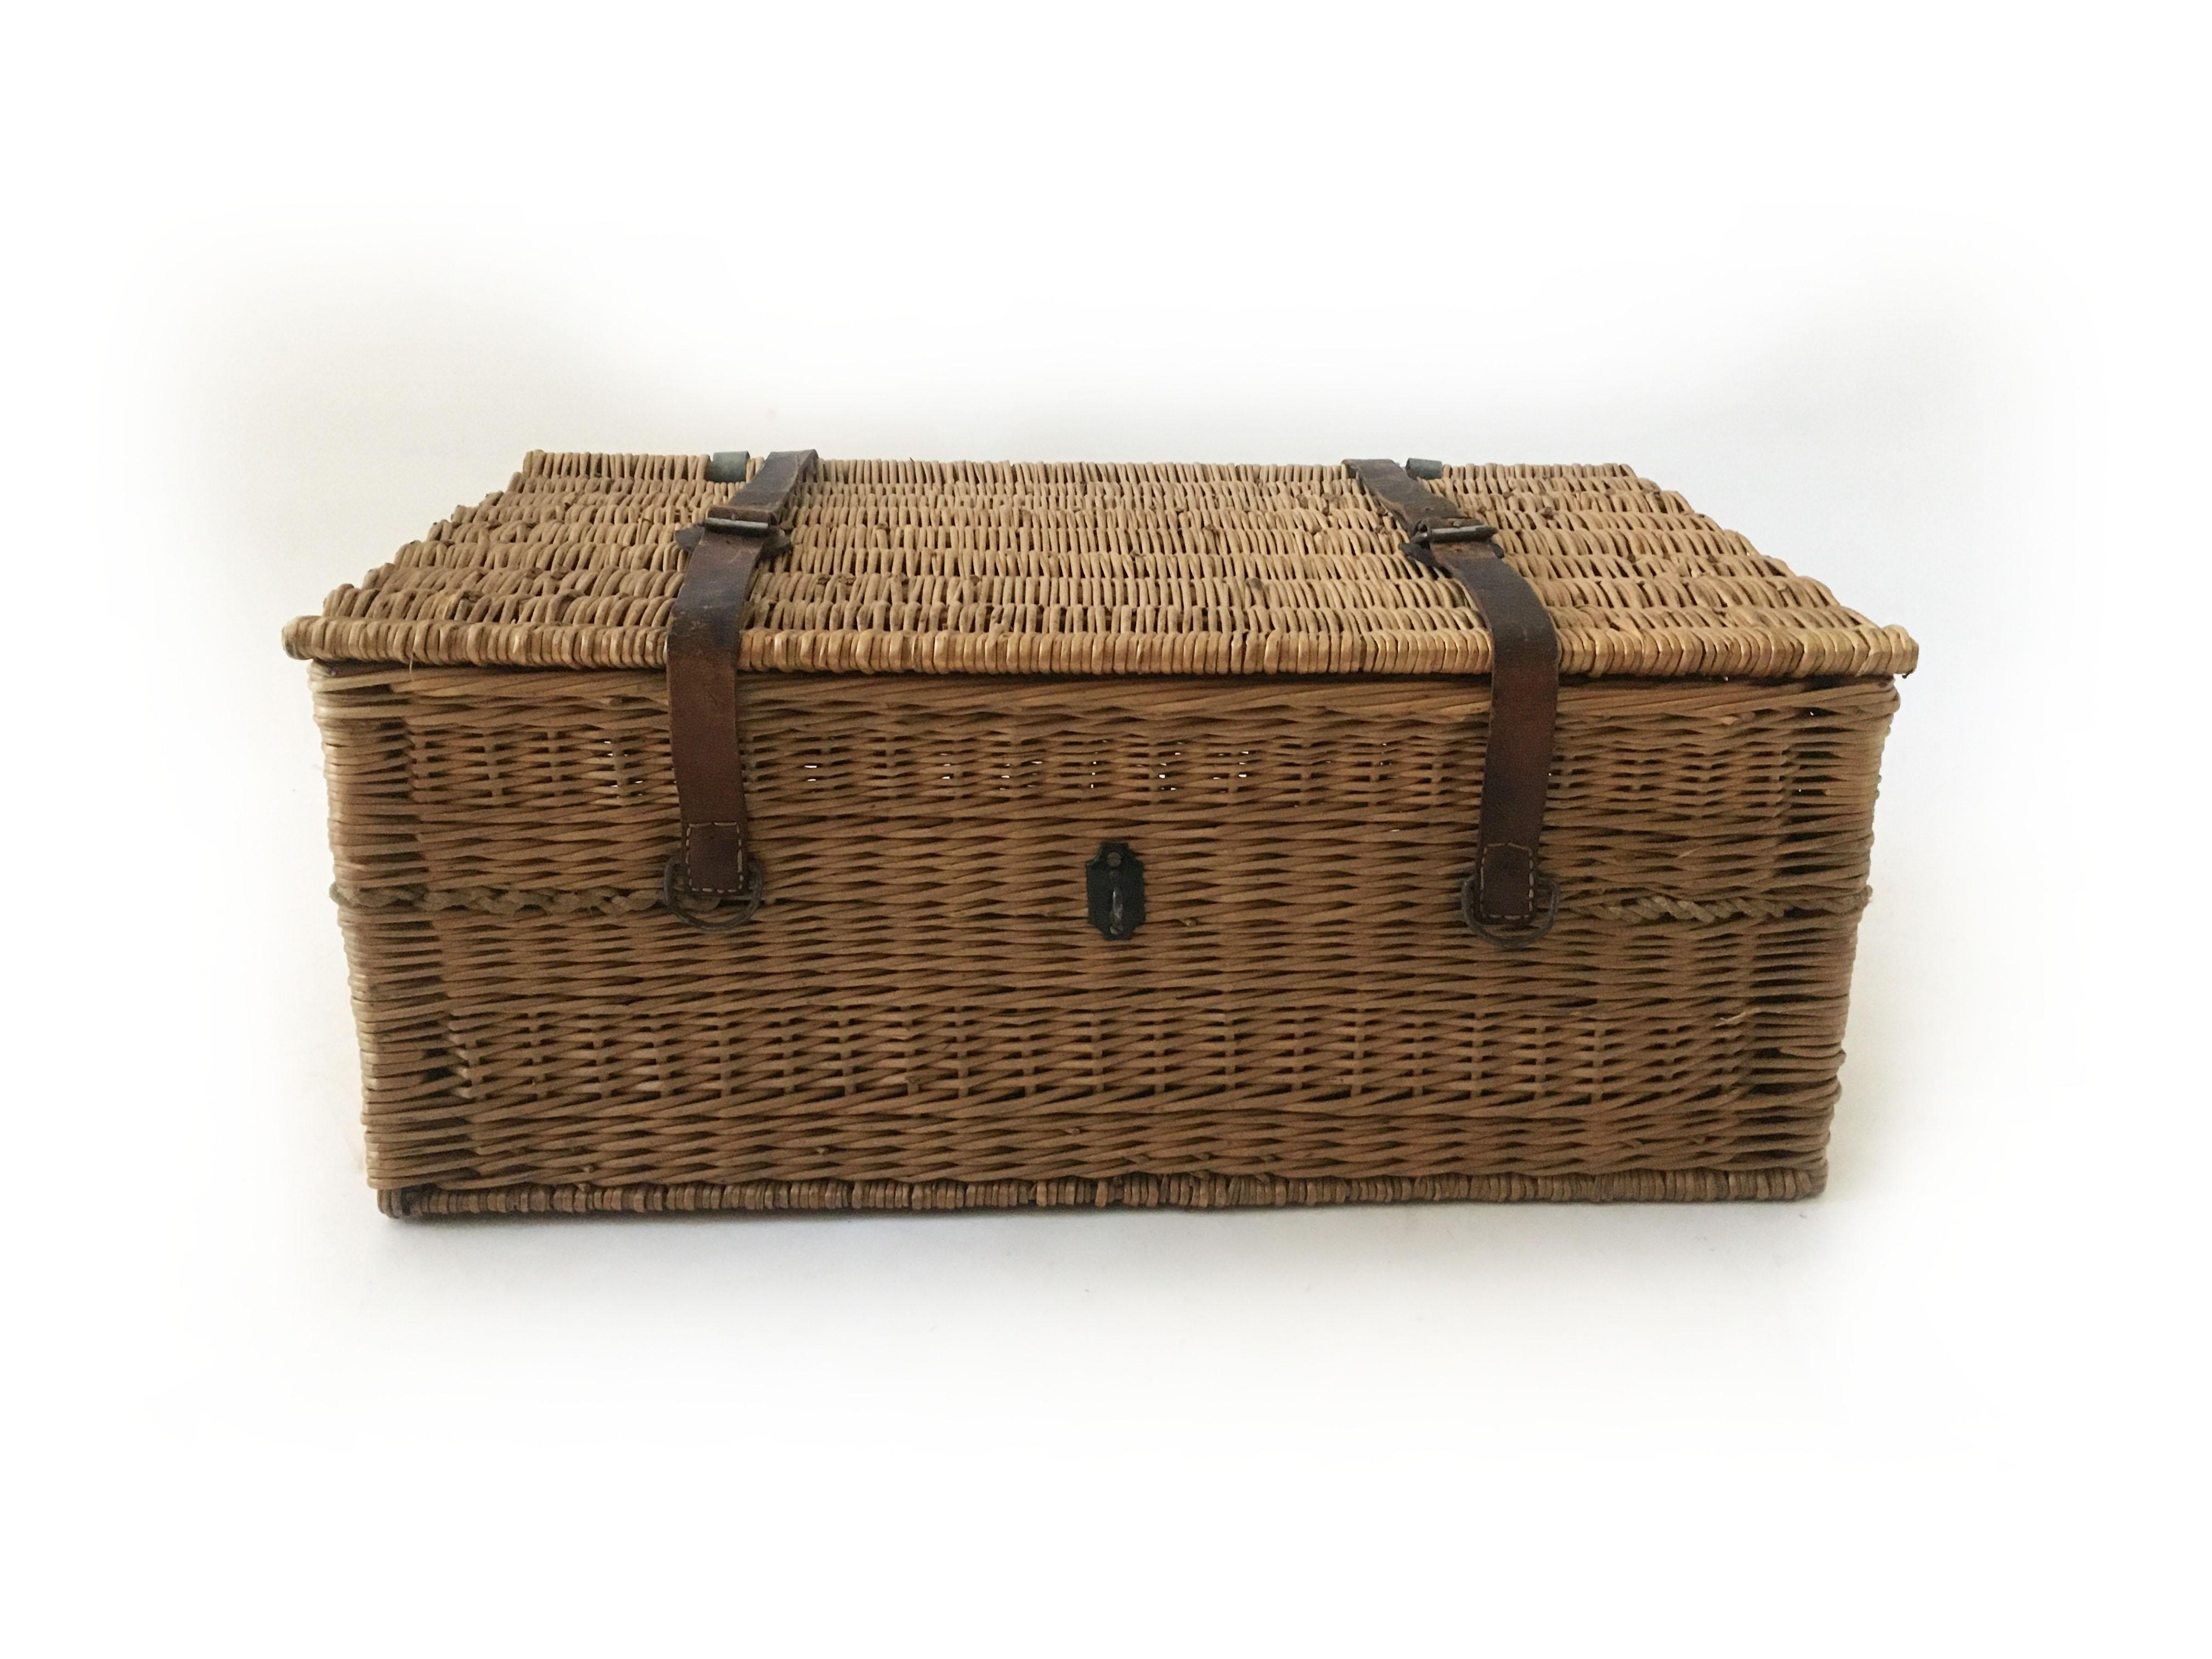 Vintage Wicker trunk, wine basket from Bordeaux, France, 1930s. Remarkable good condition, given the age and that it was used for years to transport wine bottles. Charming patina to the leather belts. Makes a lovely coffee table for a intimate